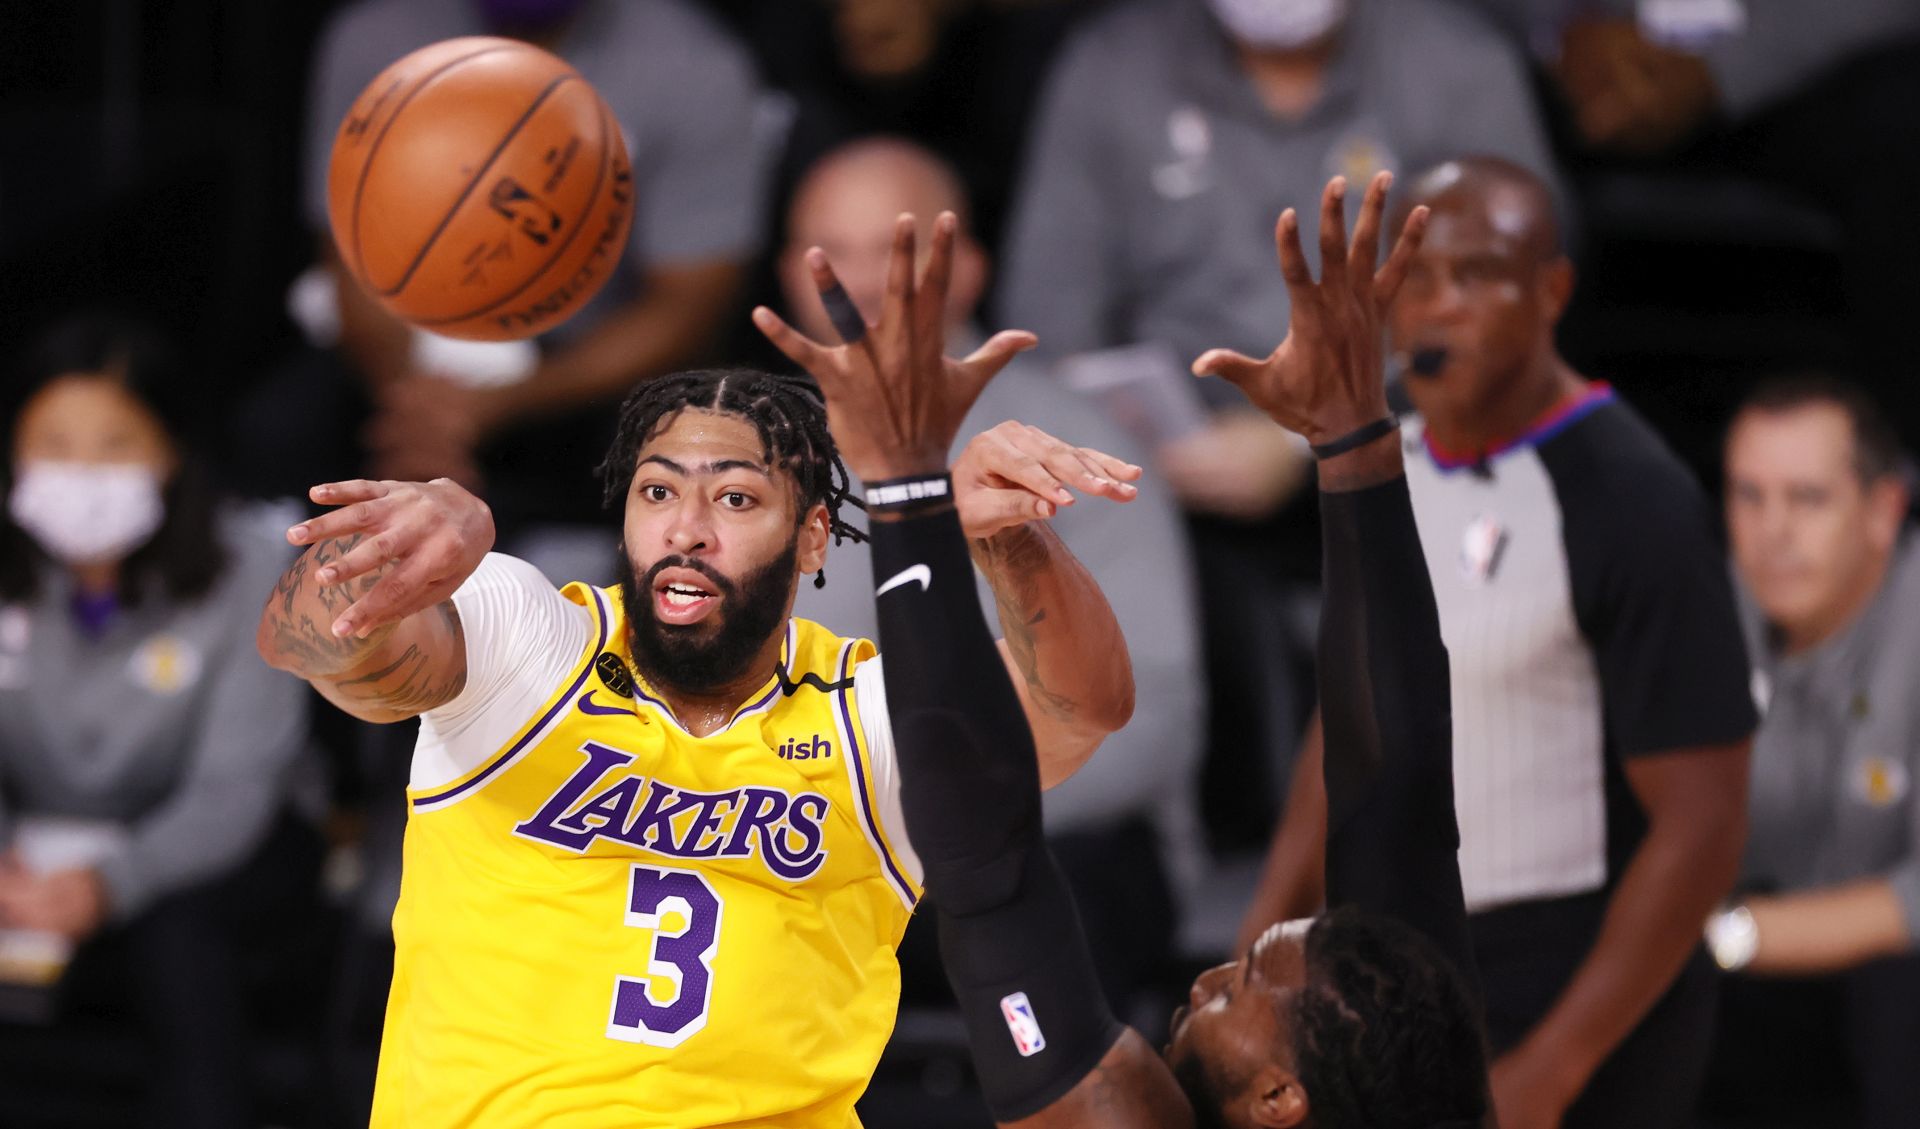 epa08725567 Los Angeles Lakers forward Anthony Davis (L) passes the ball over Miami Heat forward Jae Crowder (R) in the second quarter of their NBA Finals basketball game four at the ESPN Wide World of Sports Complex in Kissimmee, Florida, USA, 06 October 2020.  EPA/ERIK S. LESSER SHUTTERSTOCK OUT